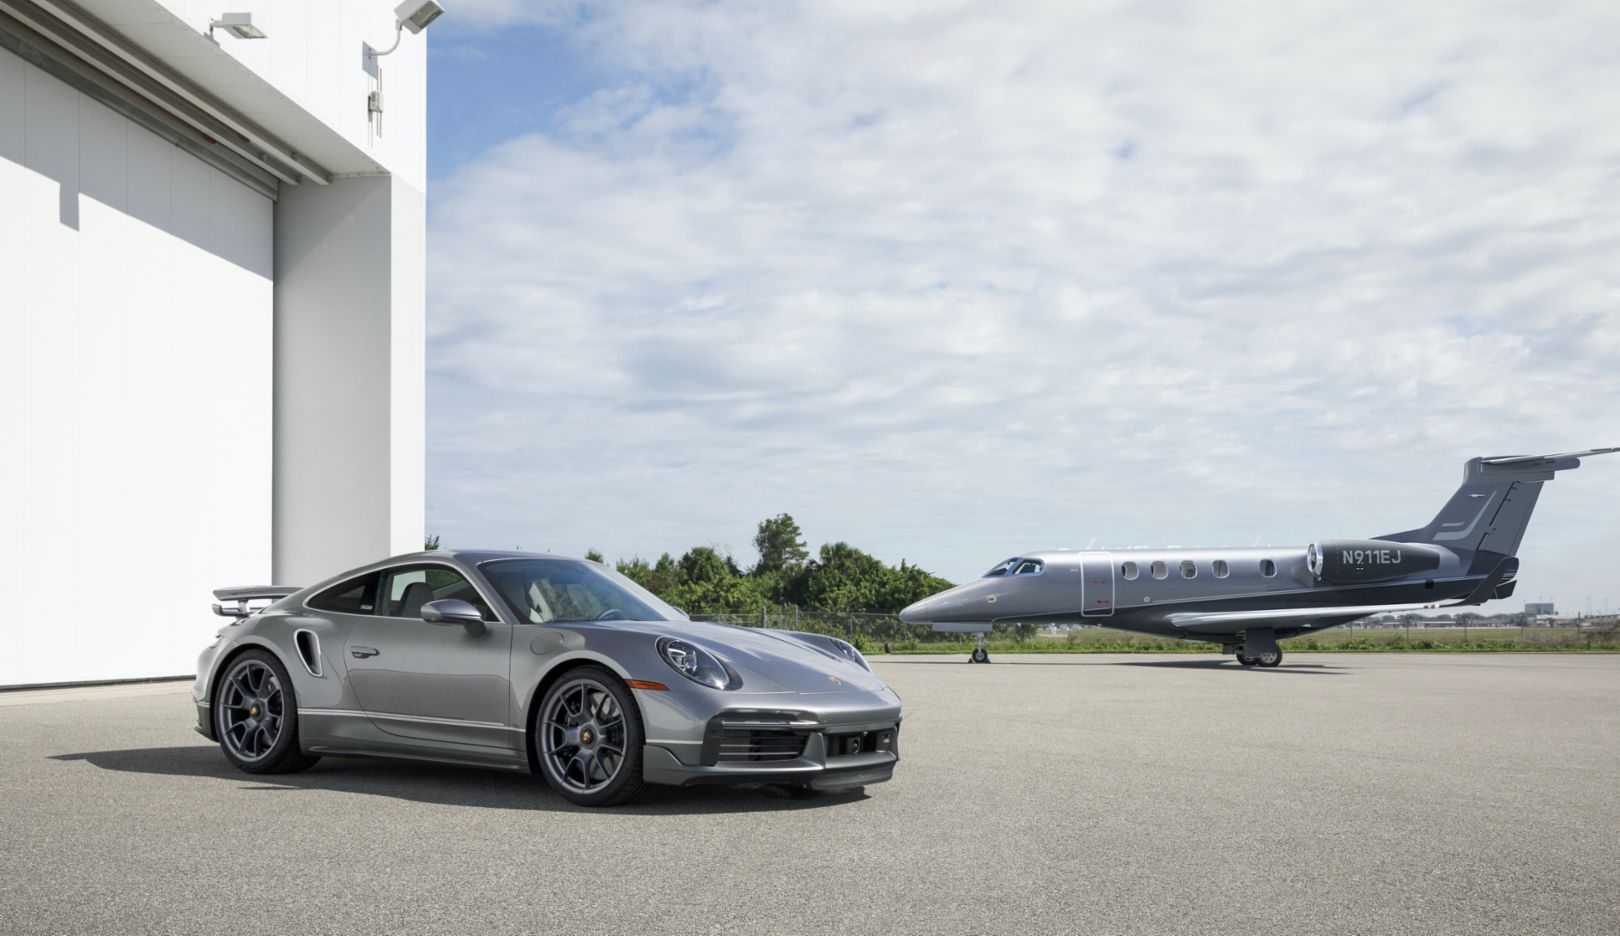 Porsche and Embraer present a duo of sports car and jet